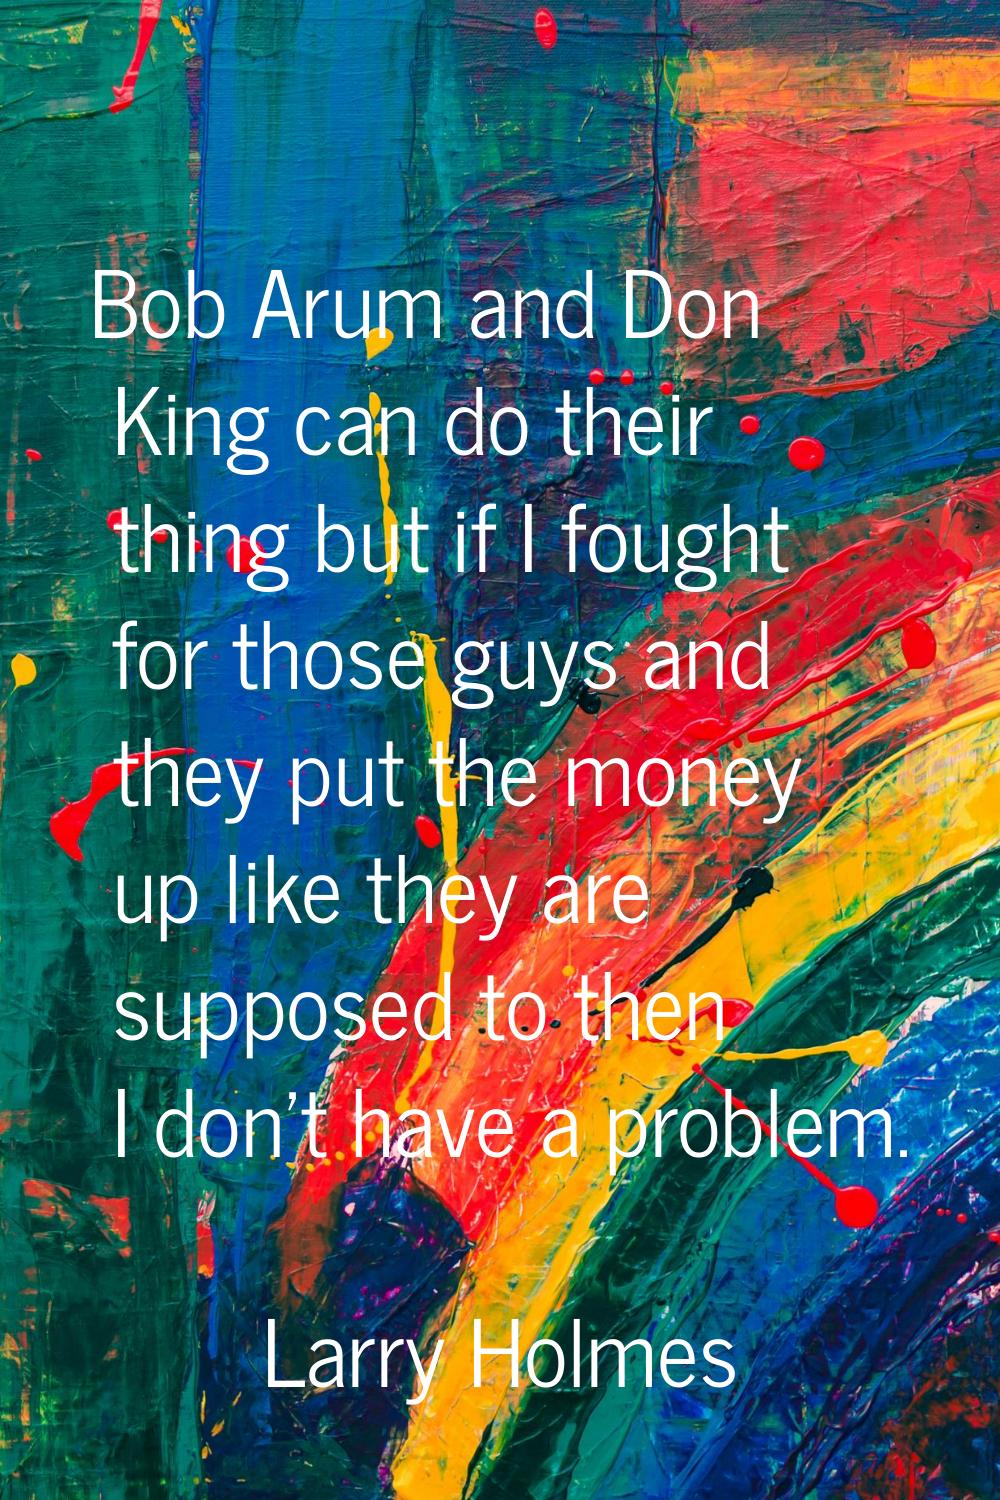 Bob Arum and Don King can do their thing but if I fought for those guys and they put the money up l